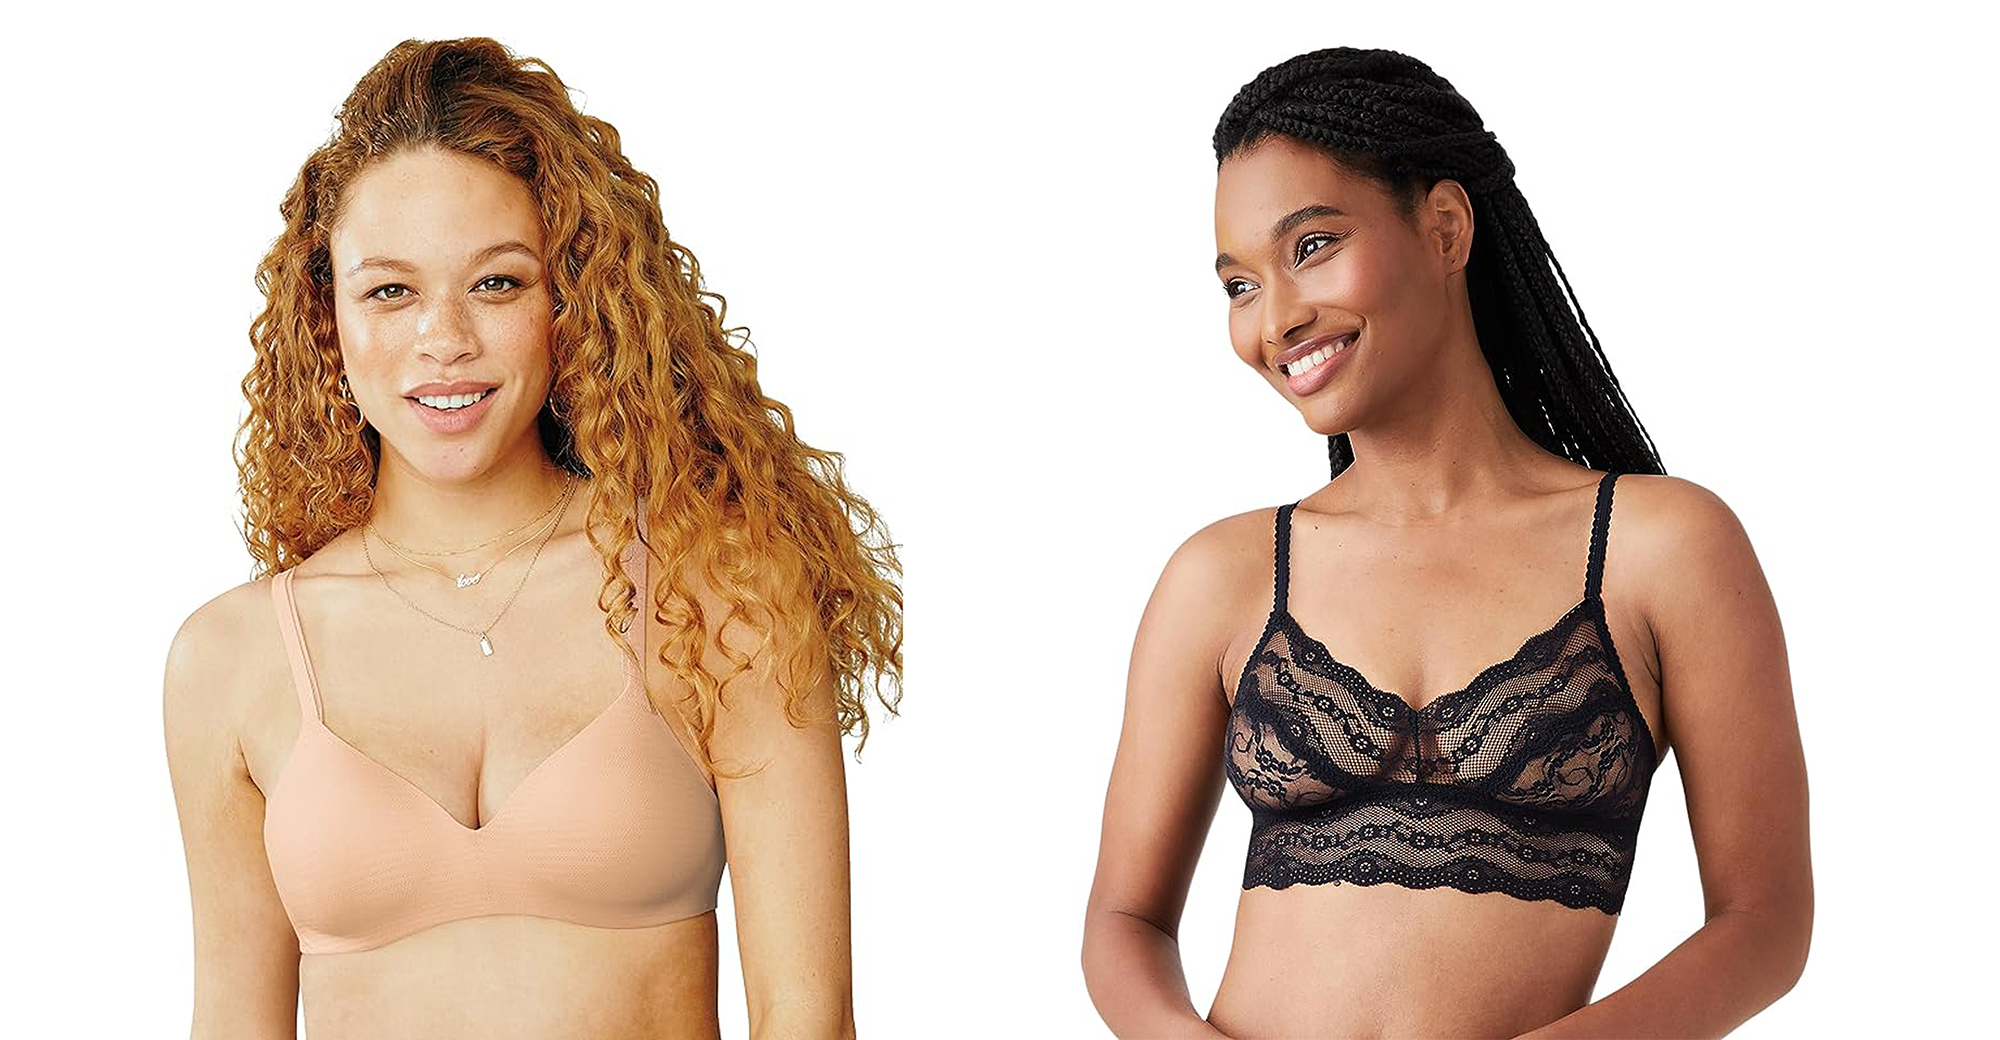 Jockey® Bralettes in Women's Clothing Department - Smith's Food